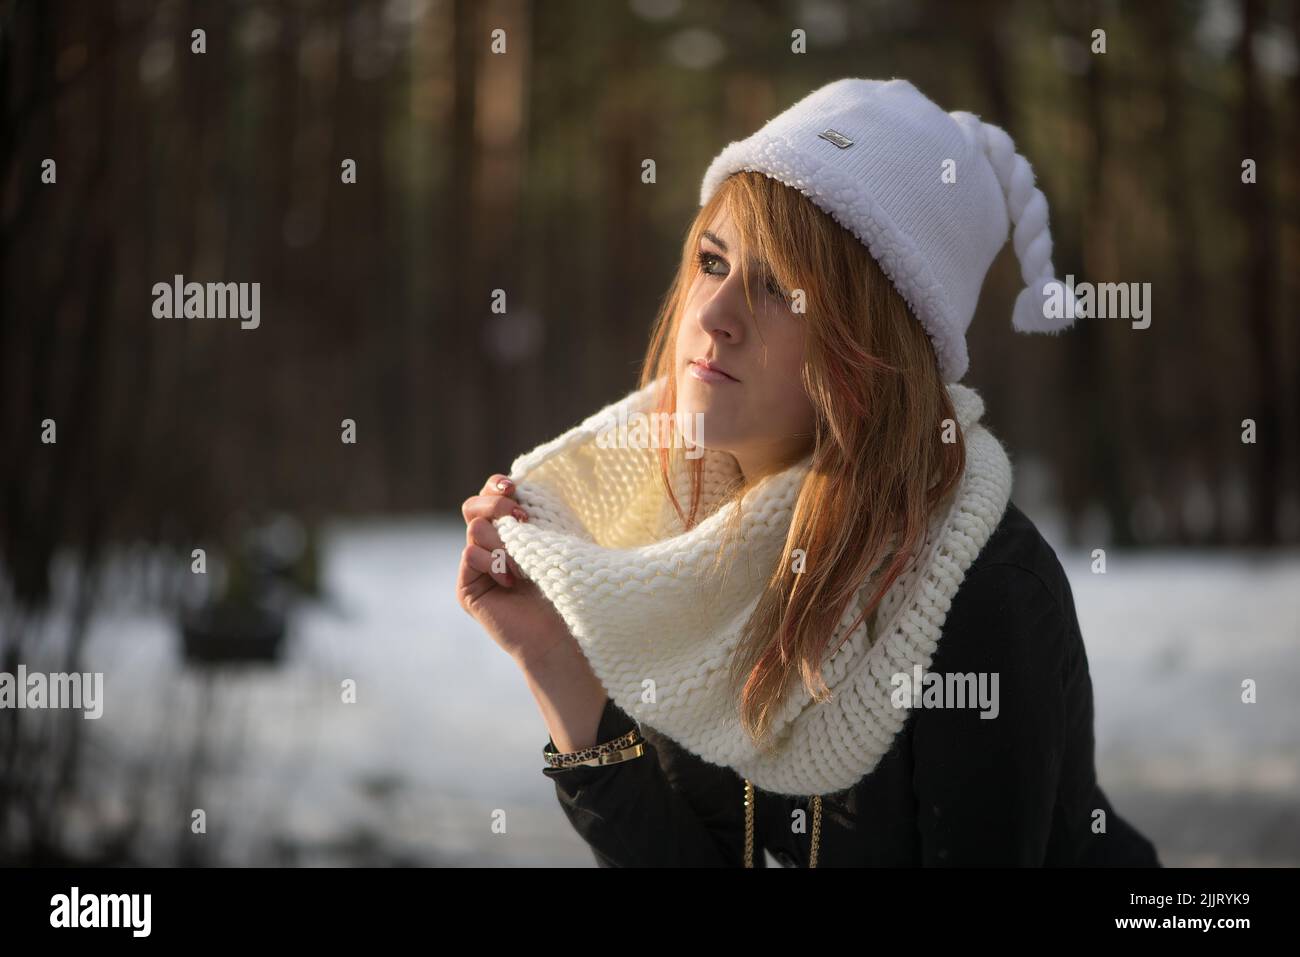 A Portrait of a Caucasian blonde girl wearing a white winter hat with a blurred snowy background Stock Photo